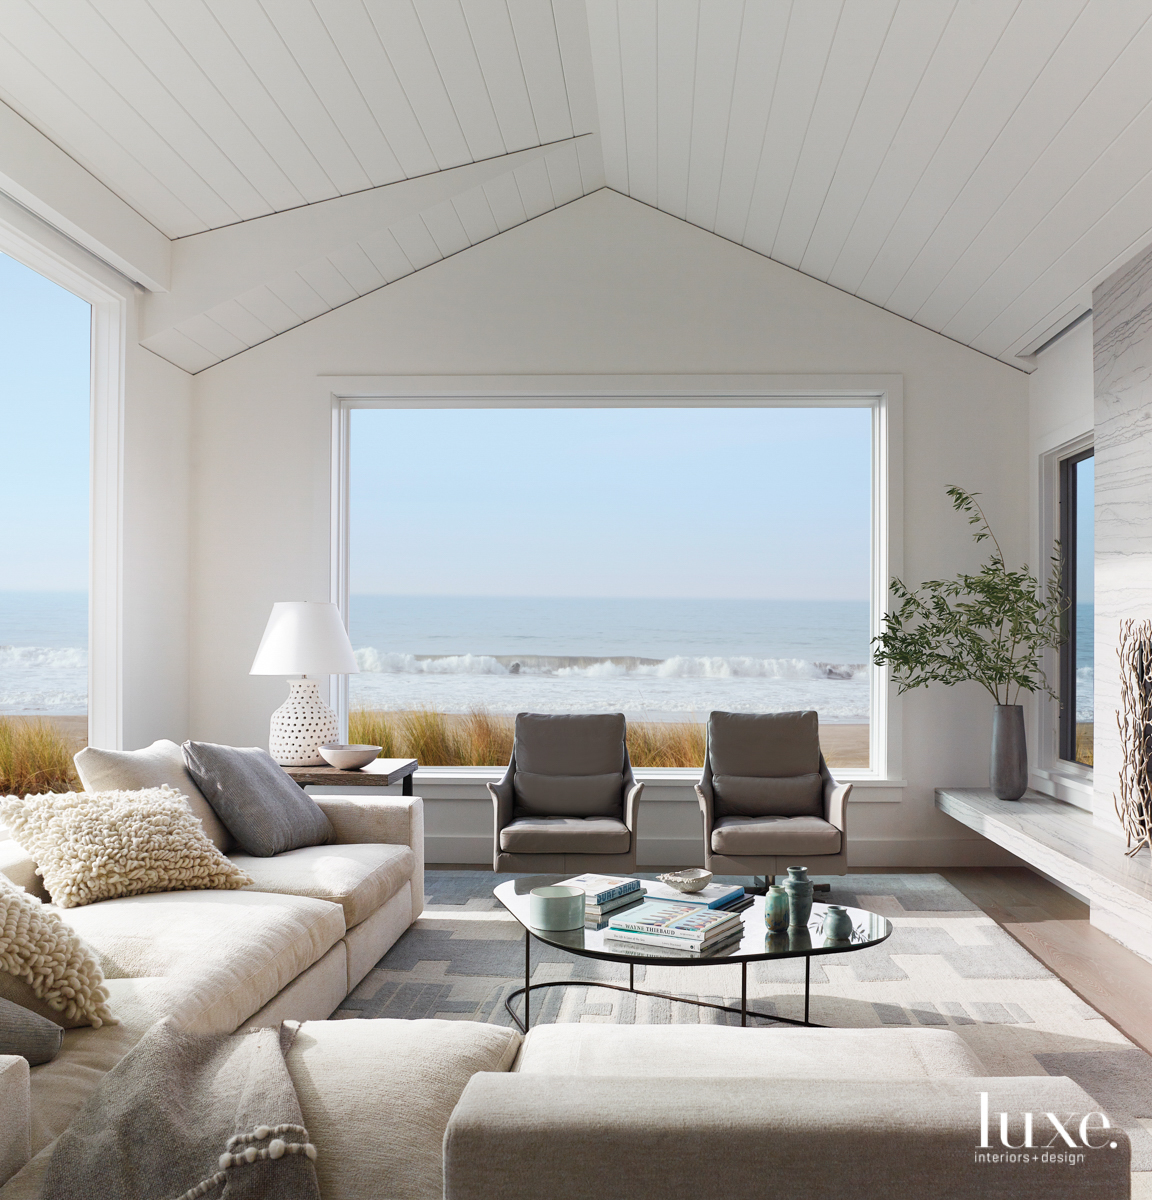 Crashing ocean waves sit right outside the window of this cream colored living room.